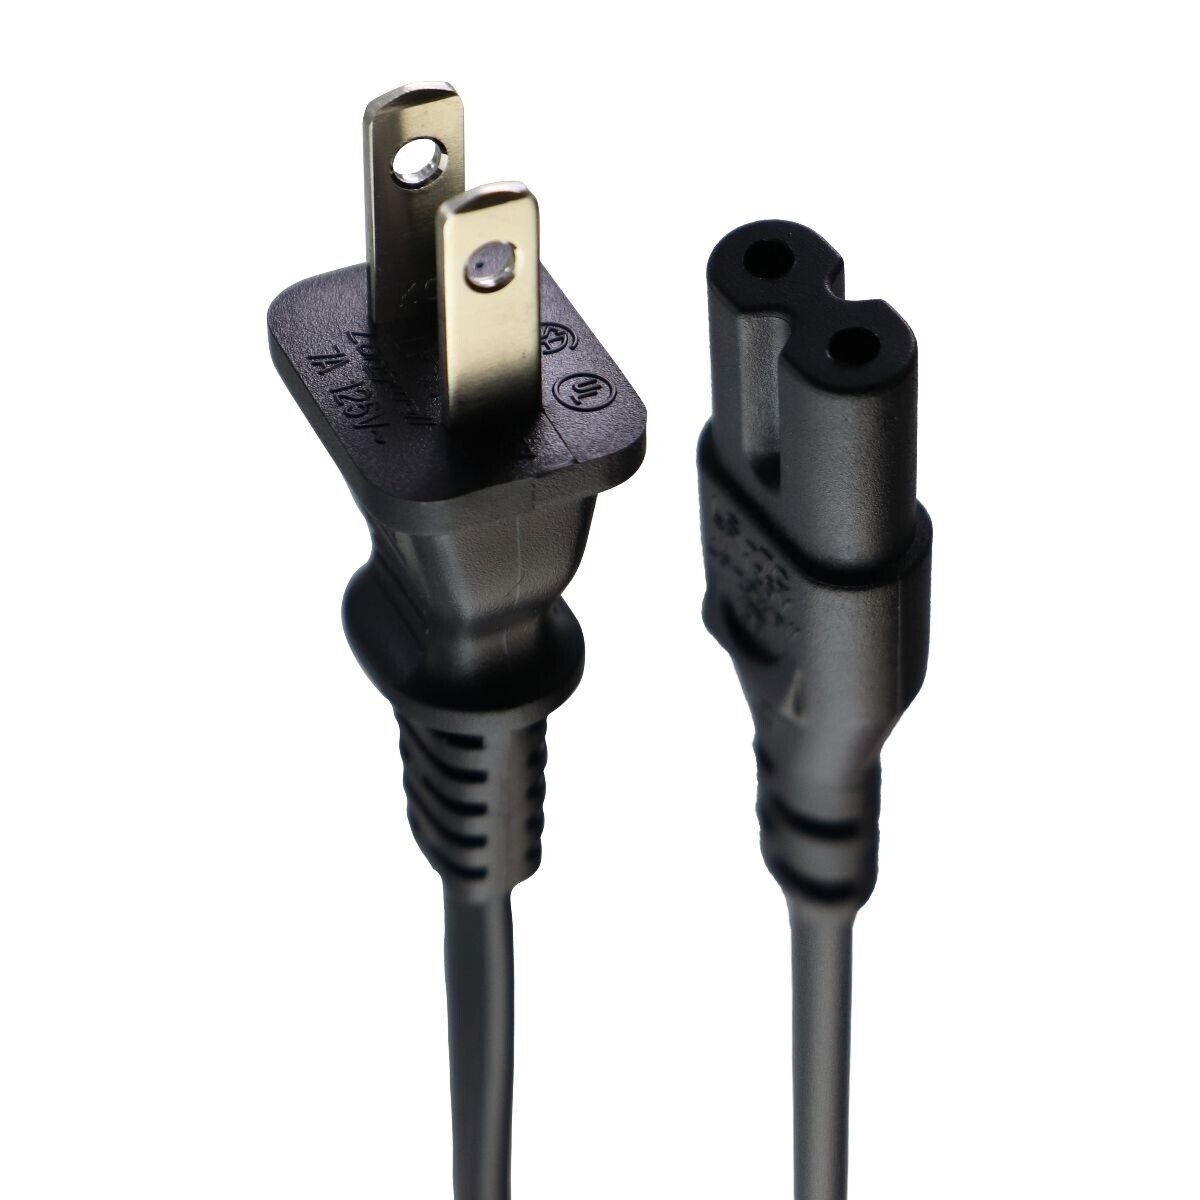 Longwell LS-7J 2 Prong Power Cord for JET - UL Listed - Black